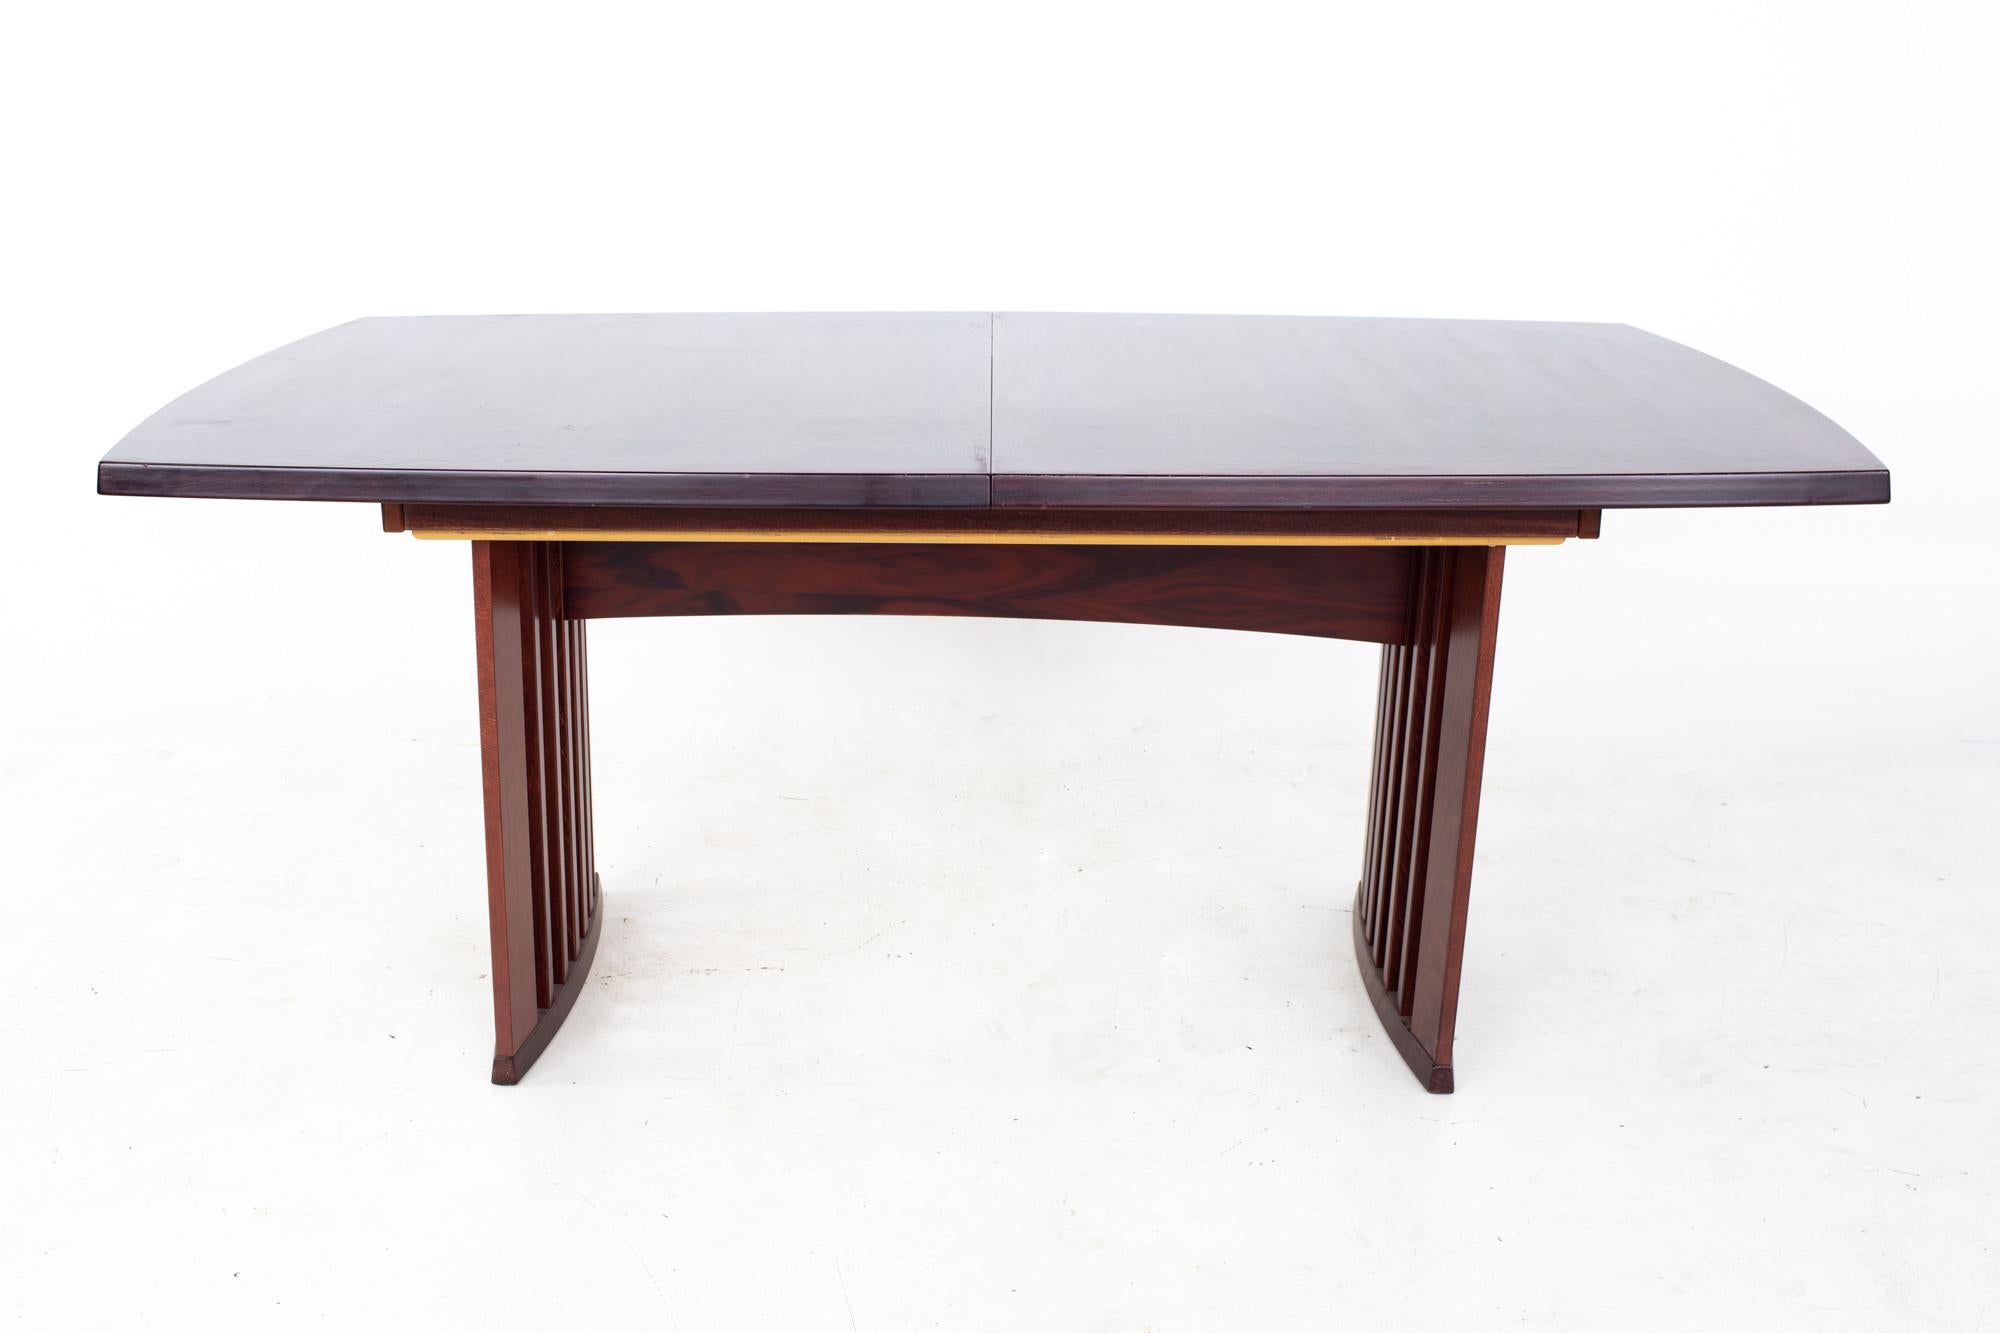 Skovby Mid Century rosewood dining table
Table measures: 68.5 wide x 39.25 deep x 29 inches high, with a chair clearance of 24.5 inches

All pieces of furniture can be had in what we call restored vintage condition. That means the piece is